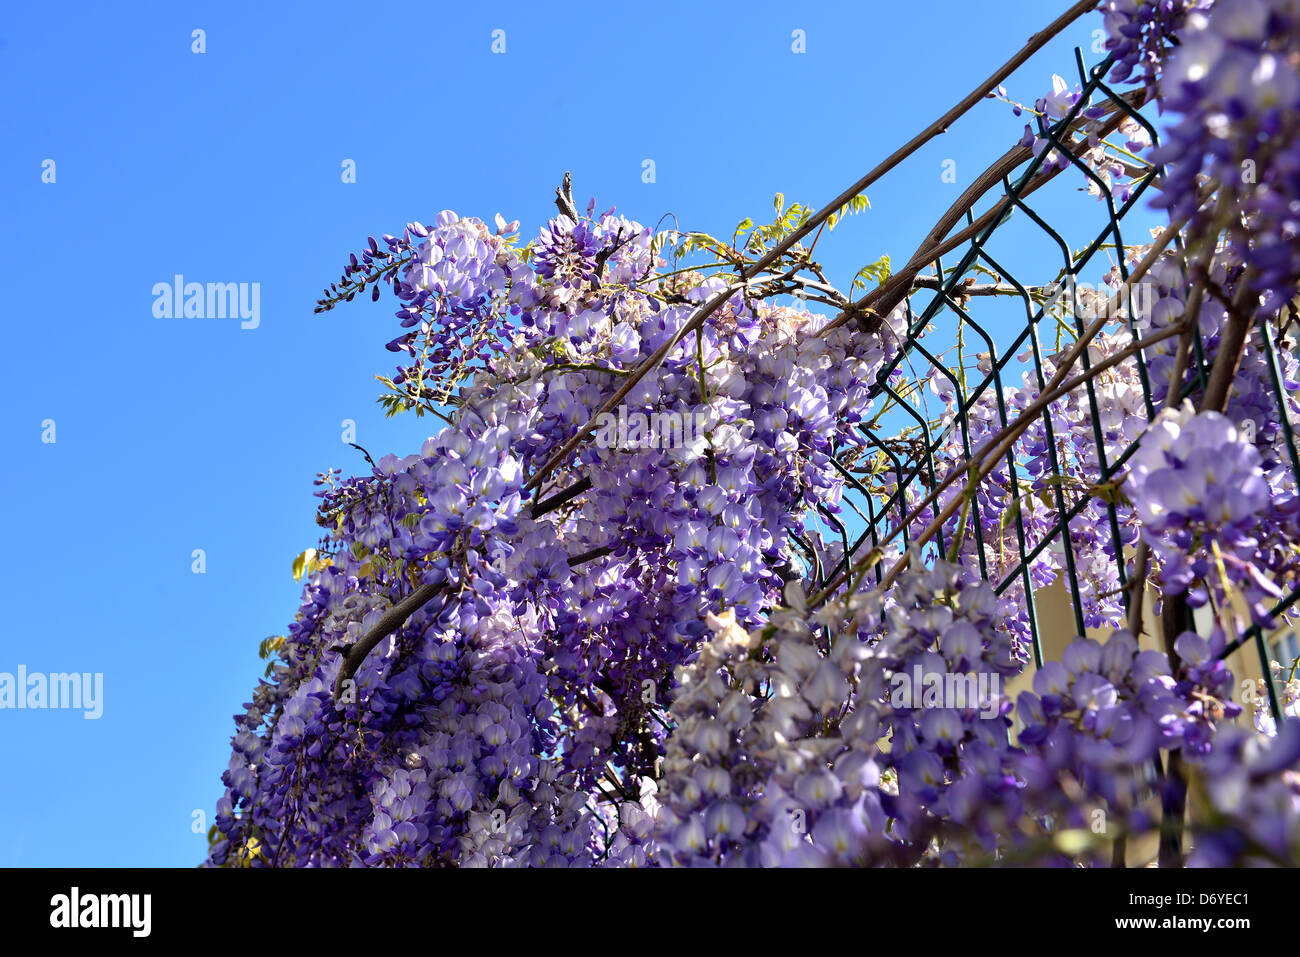 lilac-colored spring flowers Stock Photo